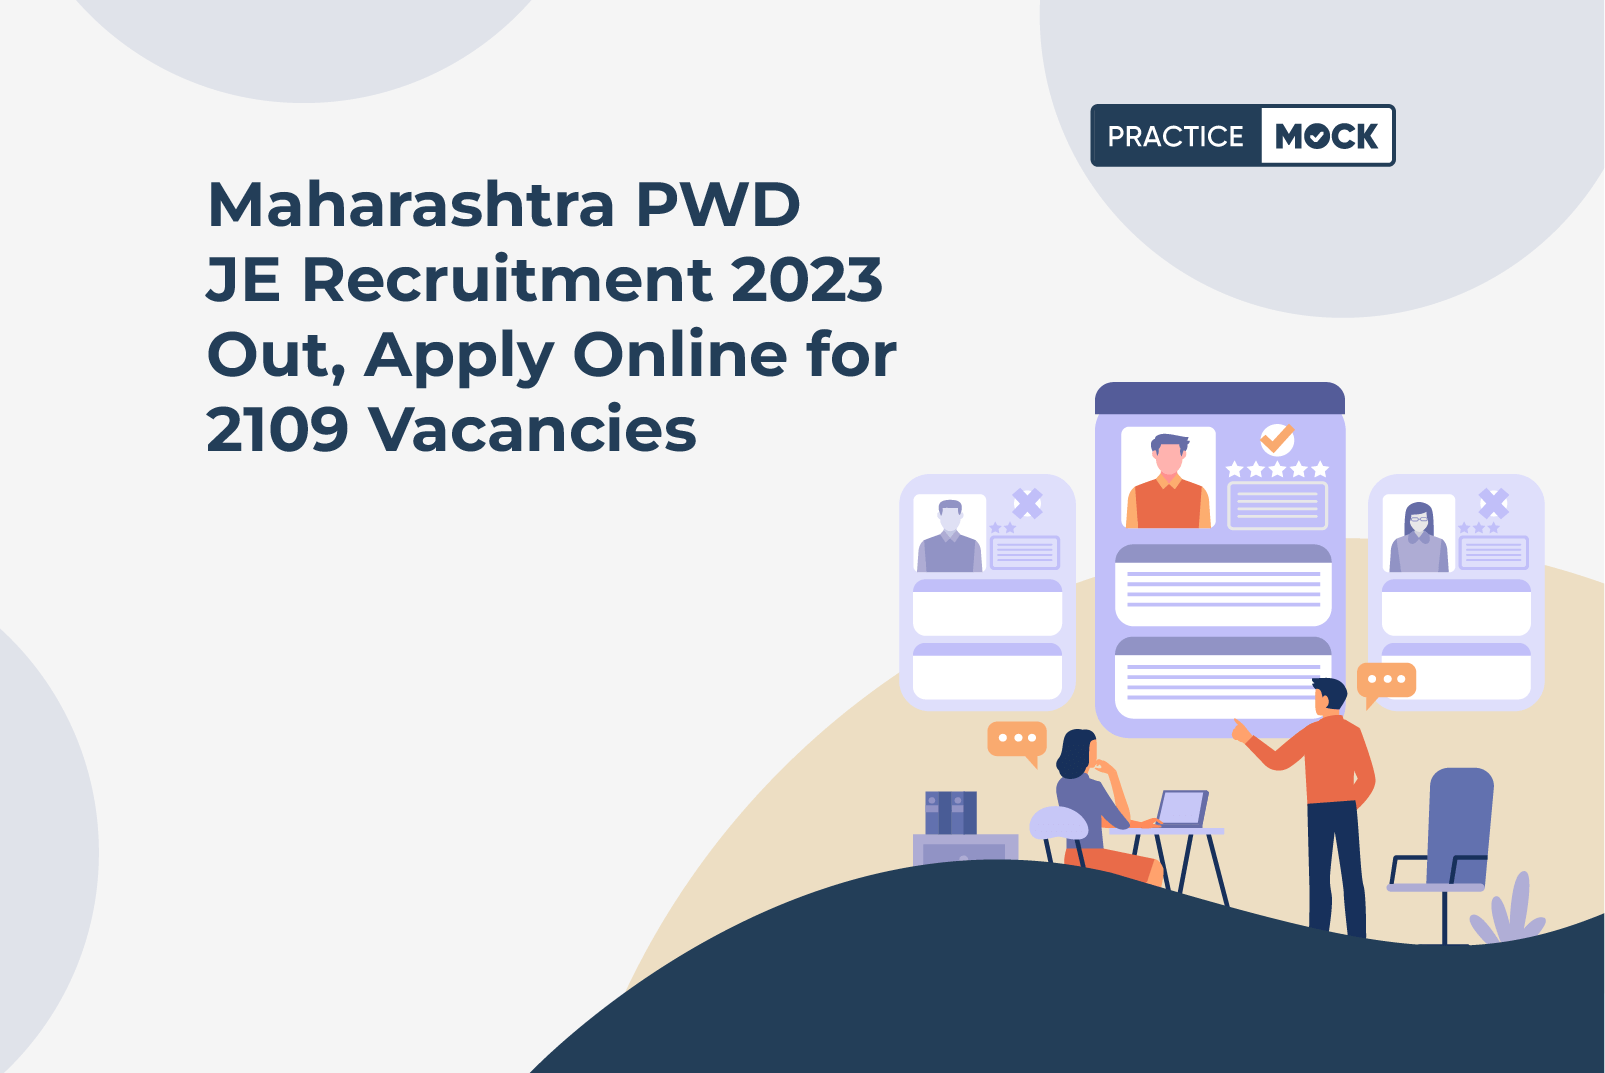 Maharashtra PWD JE Recruitment 2023 Out, Apply Online for 2109 Vacancies (1)